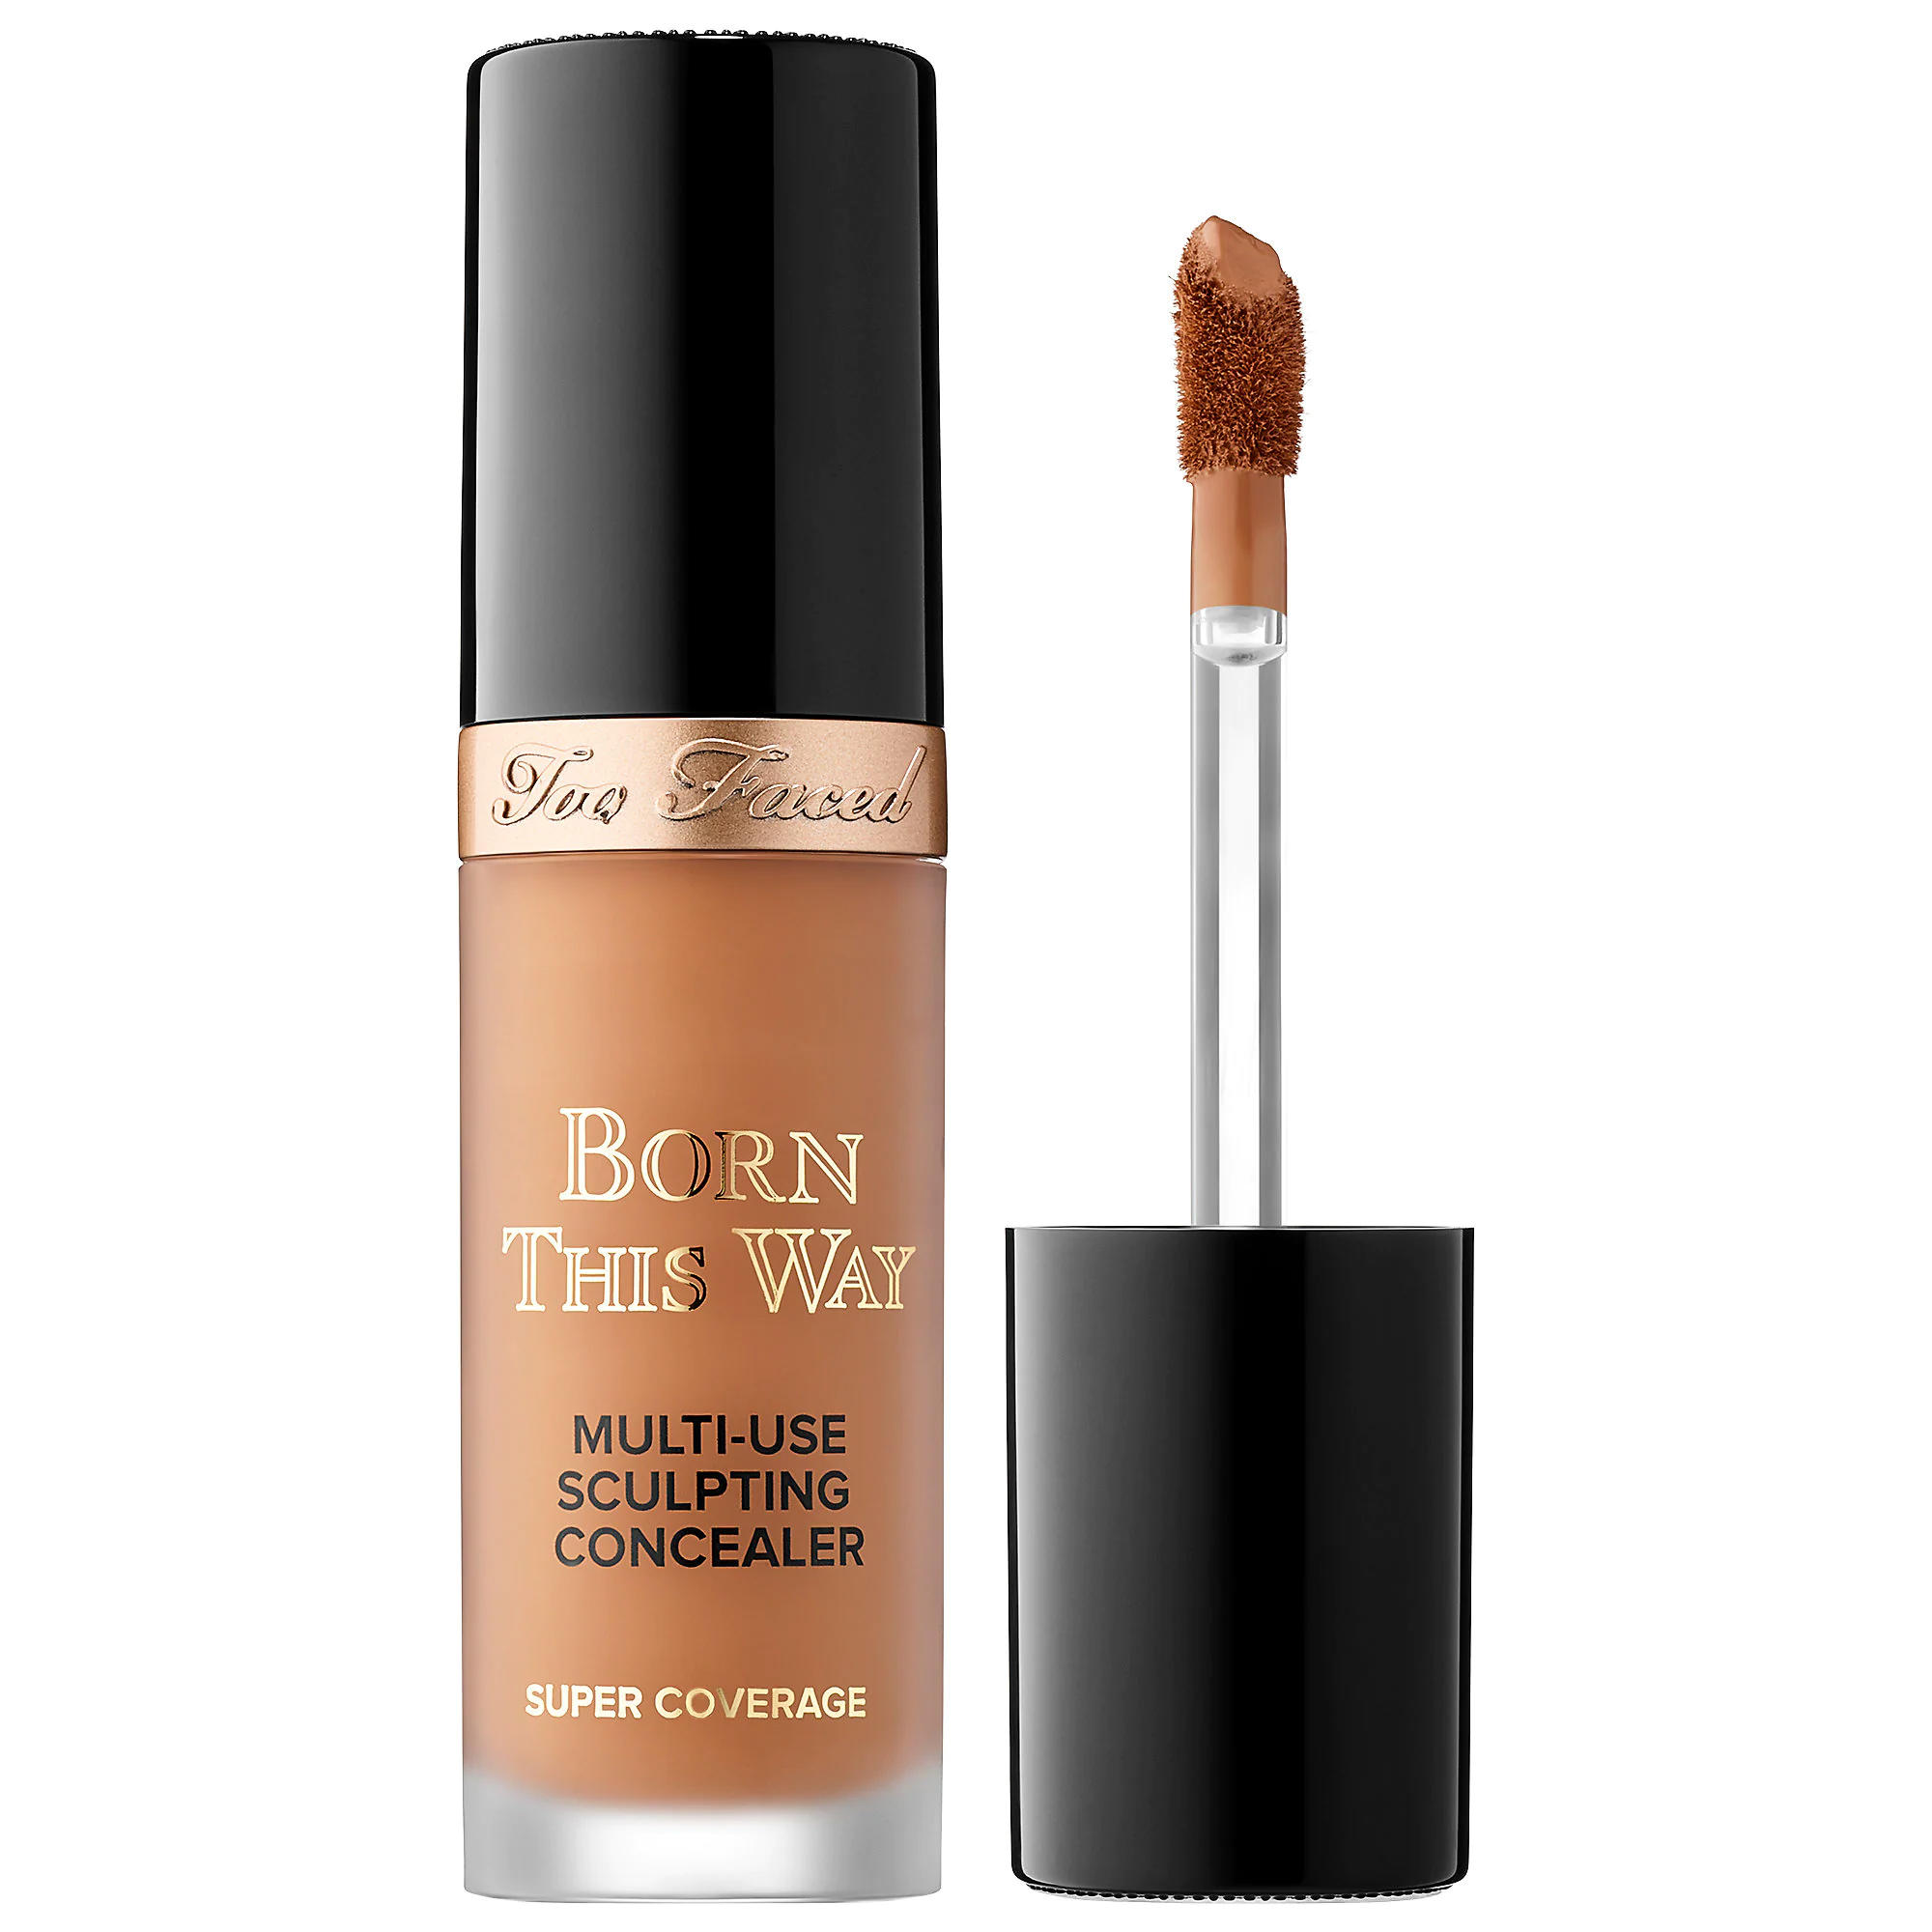 Too Faced Born This Way Multi-Use Sculpting Concealer Mahogany